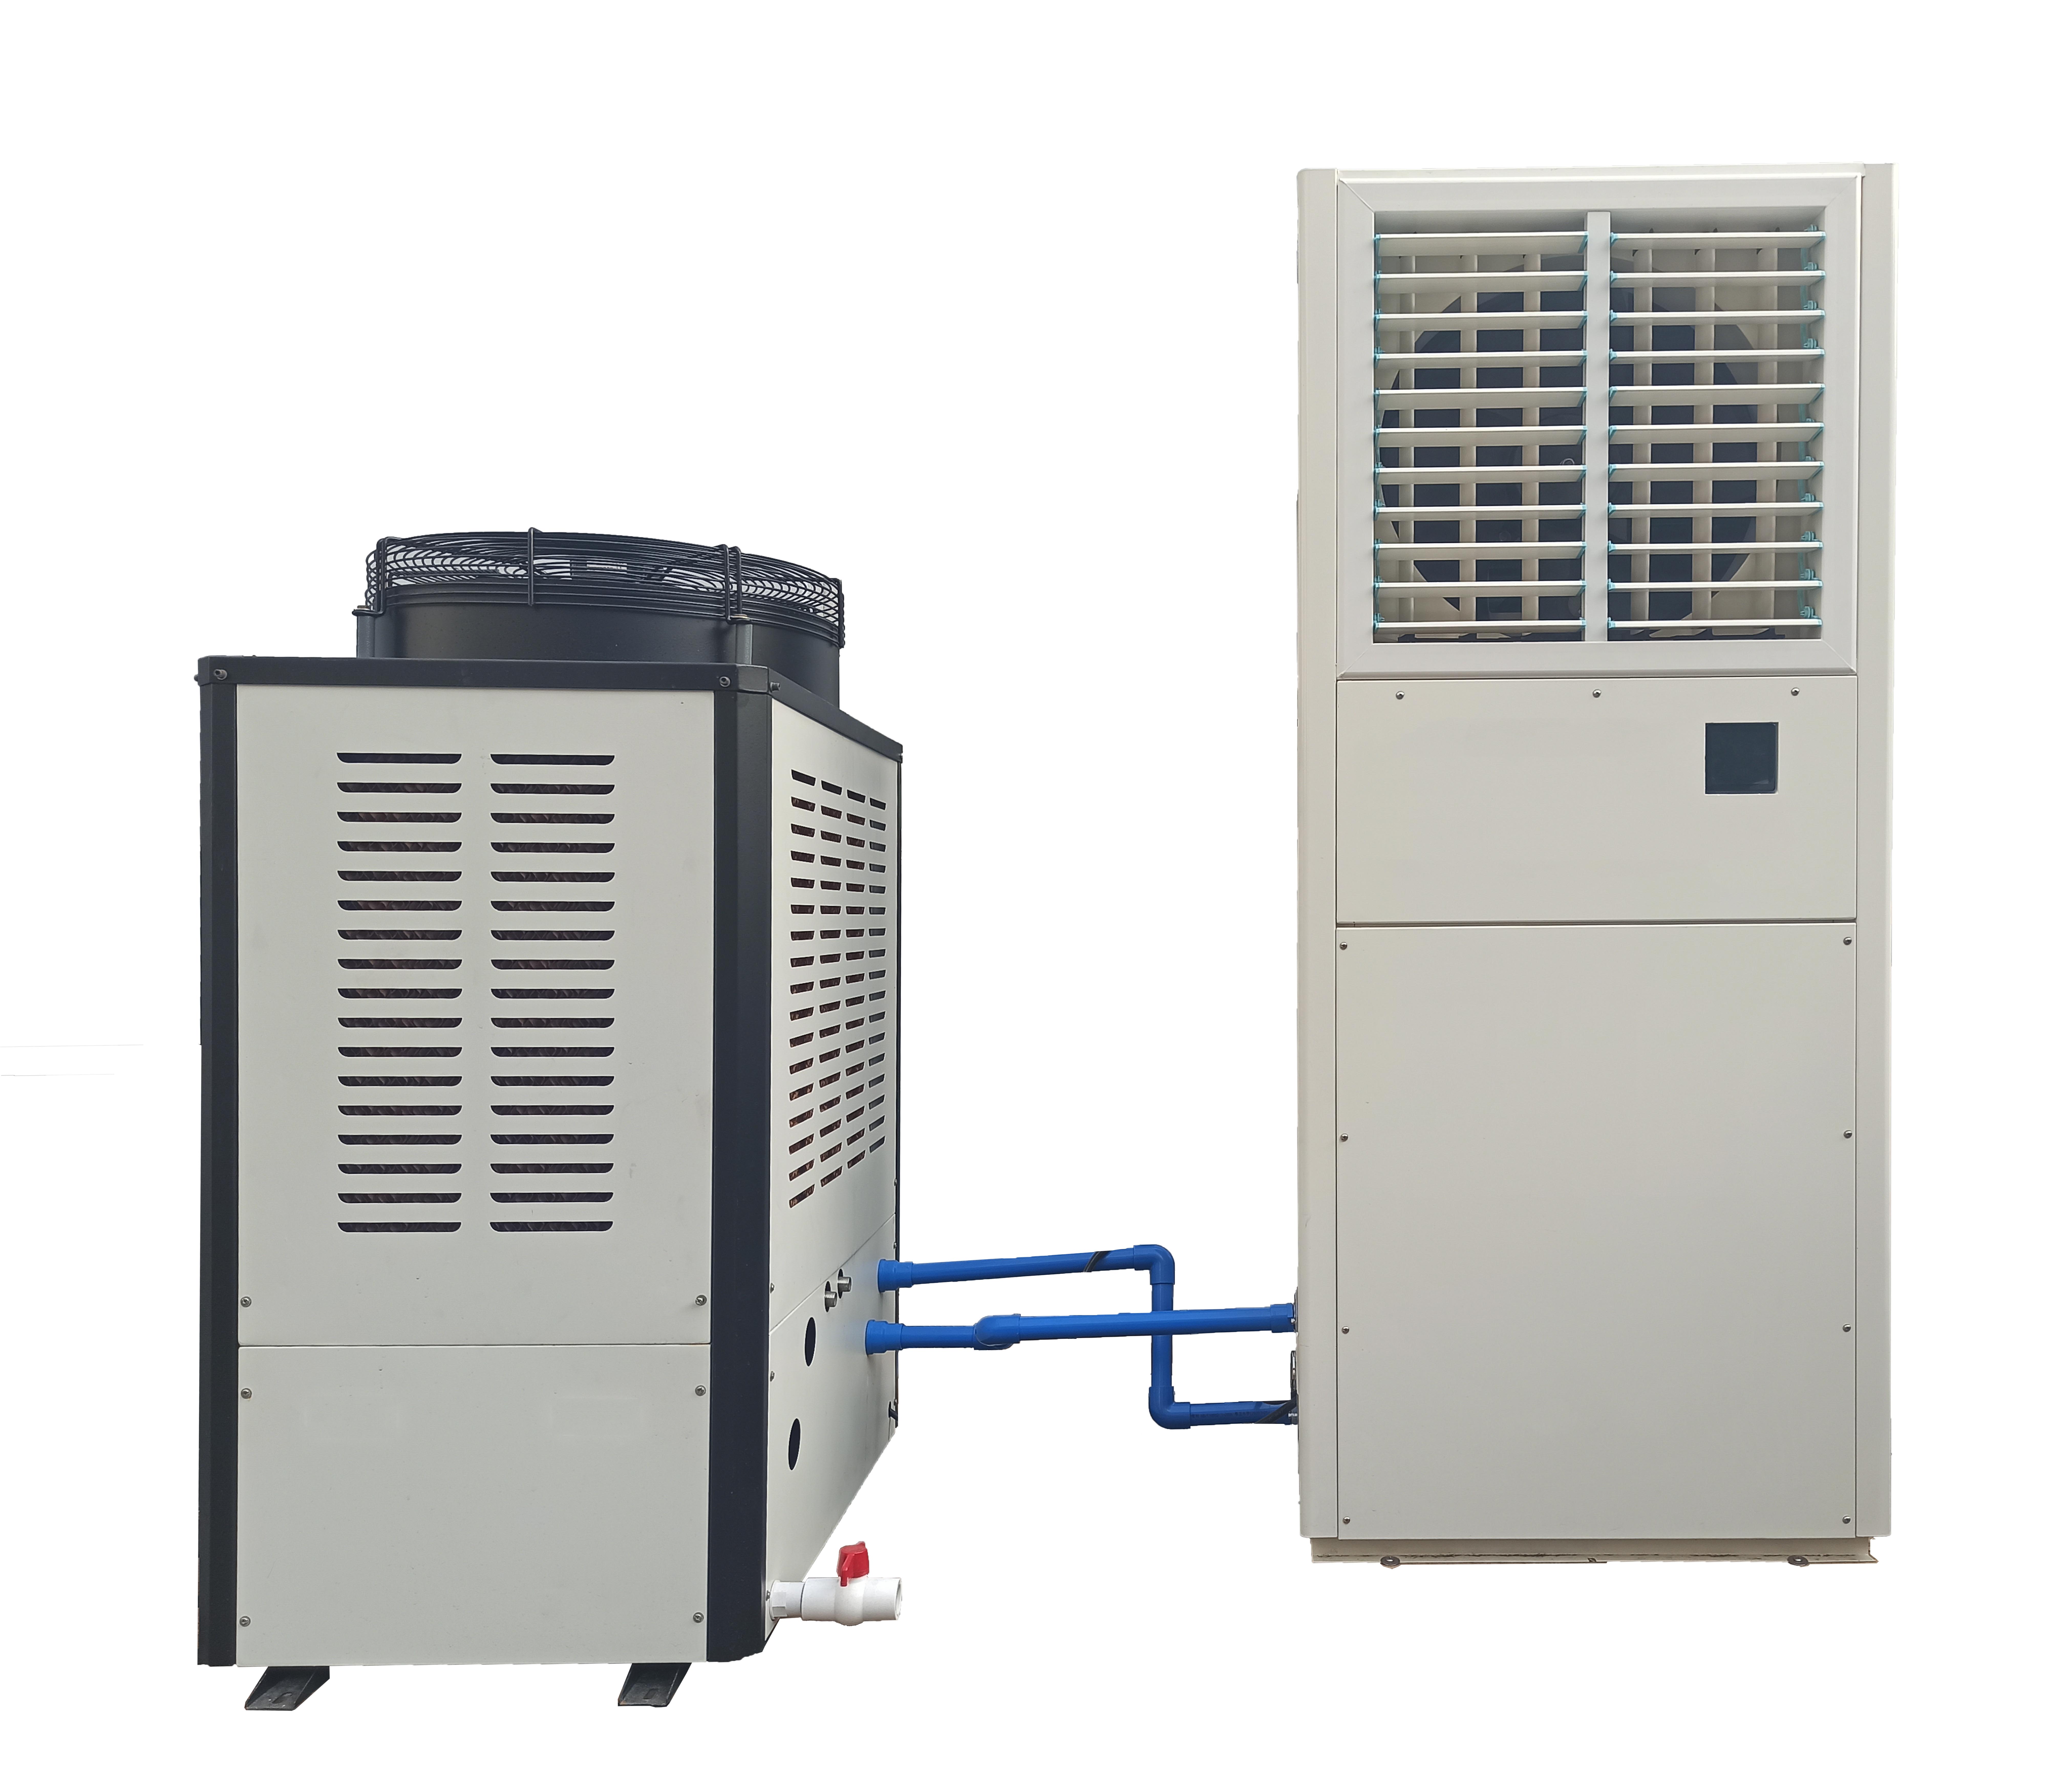 XIKOO new water evaporative industrial air conditioner with compressor Featured Image